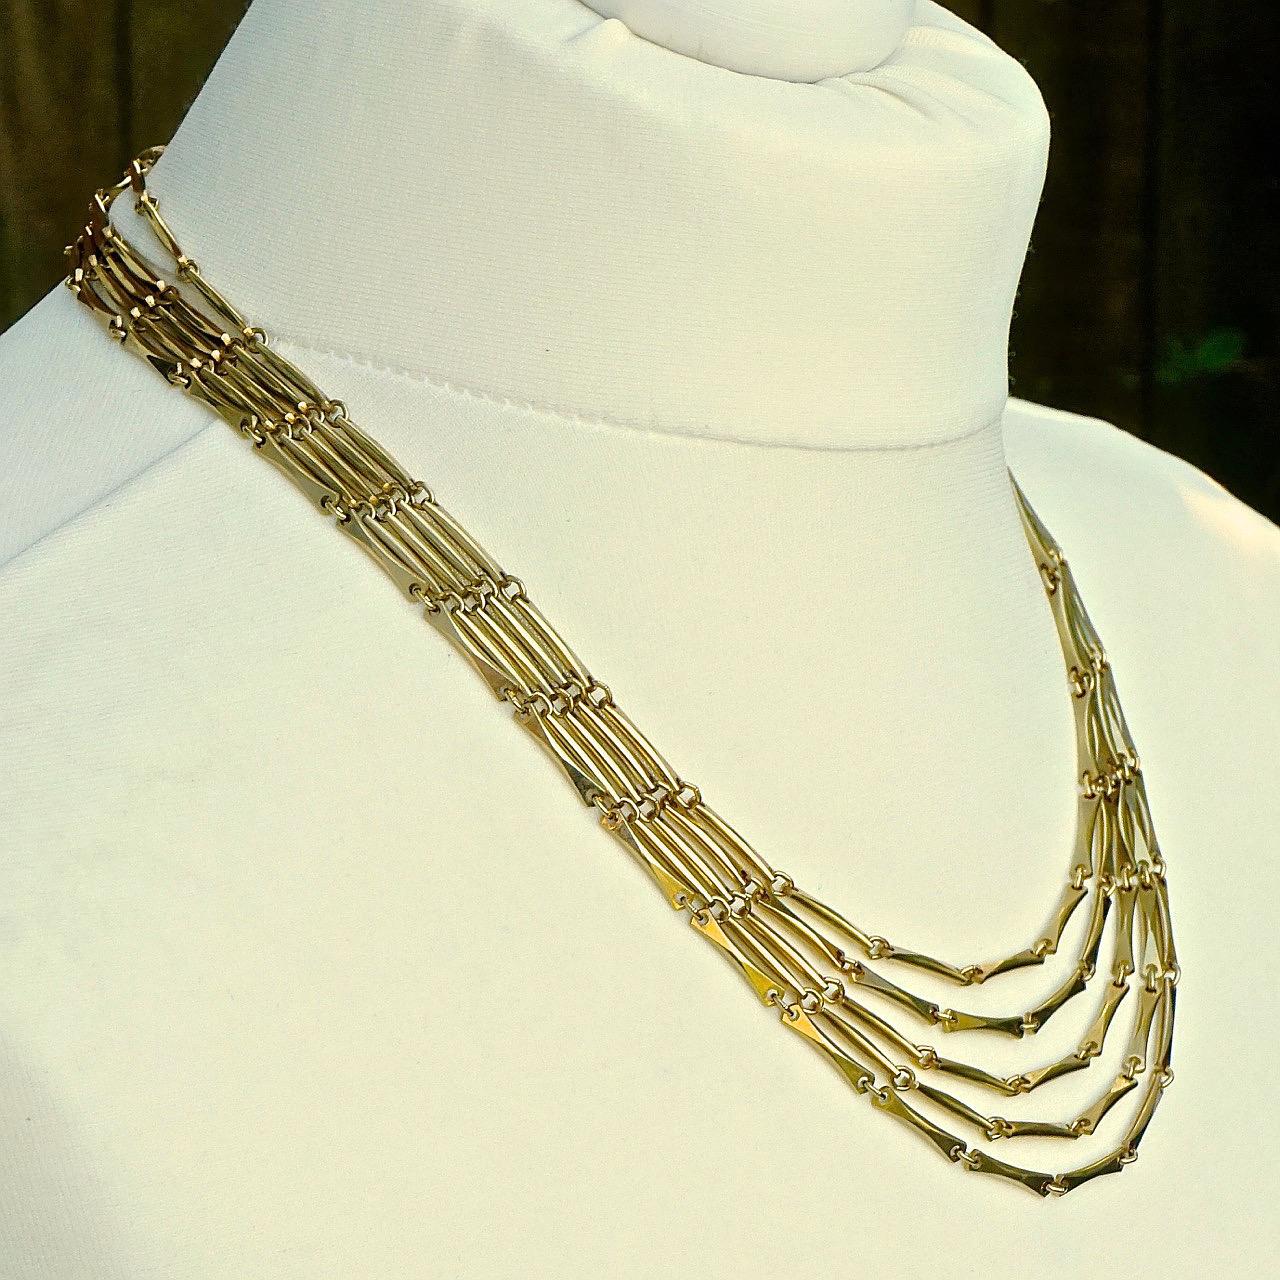 Wonderful gold plated five strand necklace, with a bar and link chain and textured clasp. The shortest strand is length 49.5cm / 19.5 inches. The necklace is in very good condition.

This is a beautiful multi chain necklace in a lovely chain design